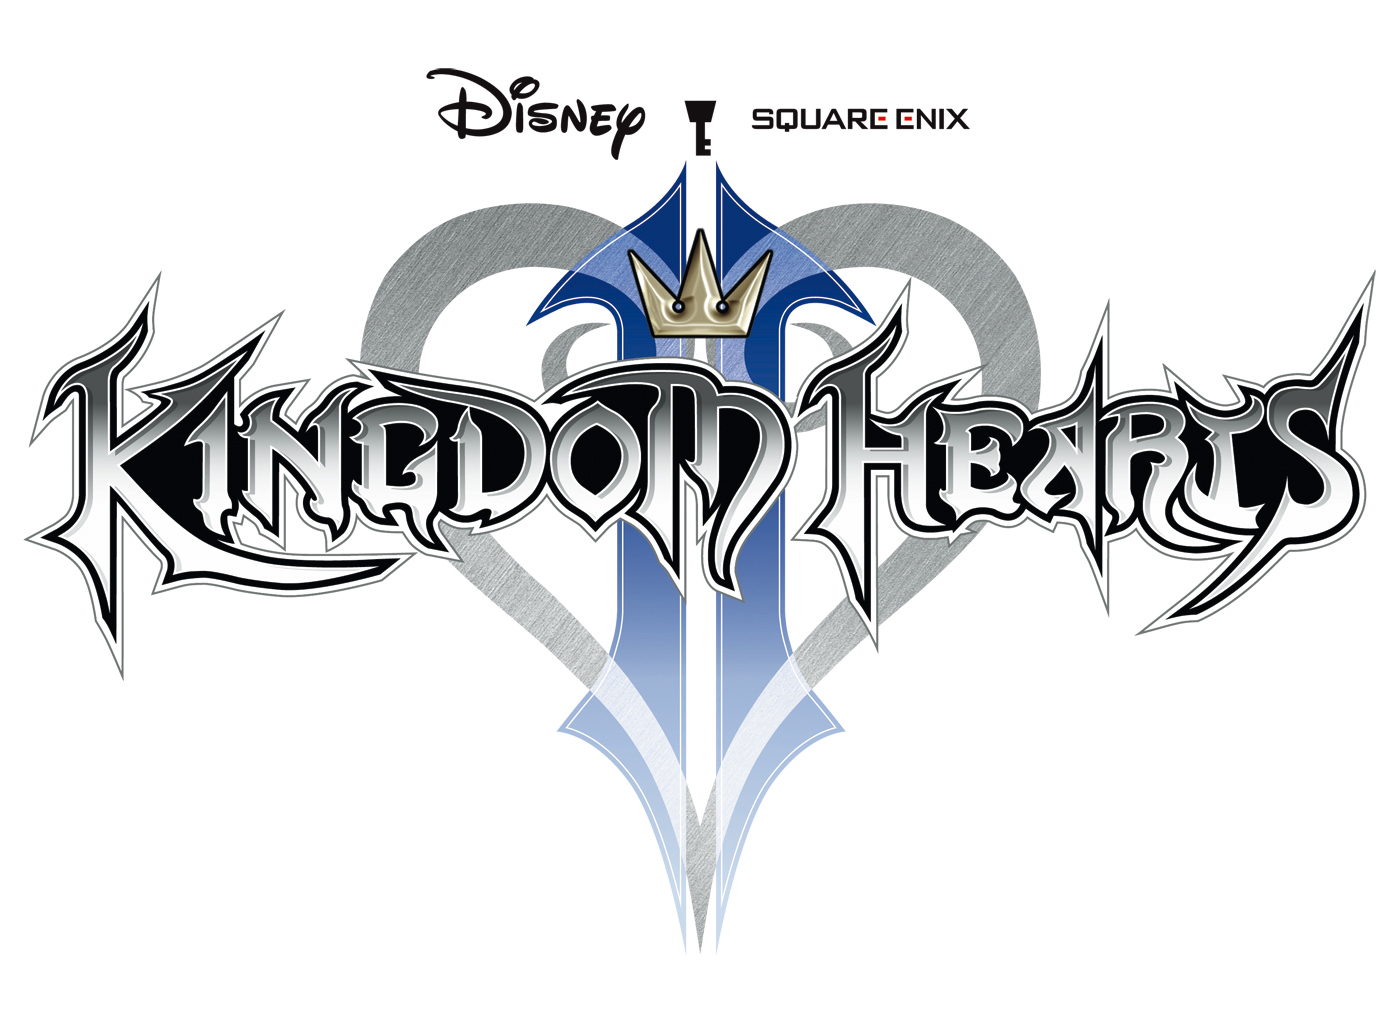 download kingdom hearts ps3 for free